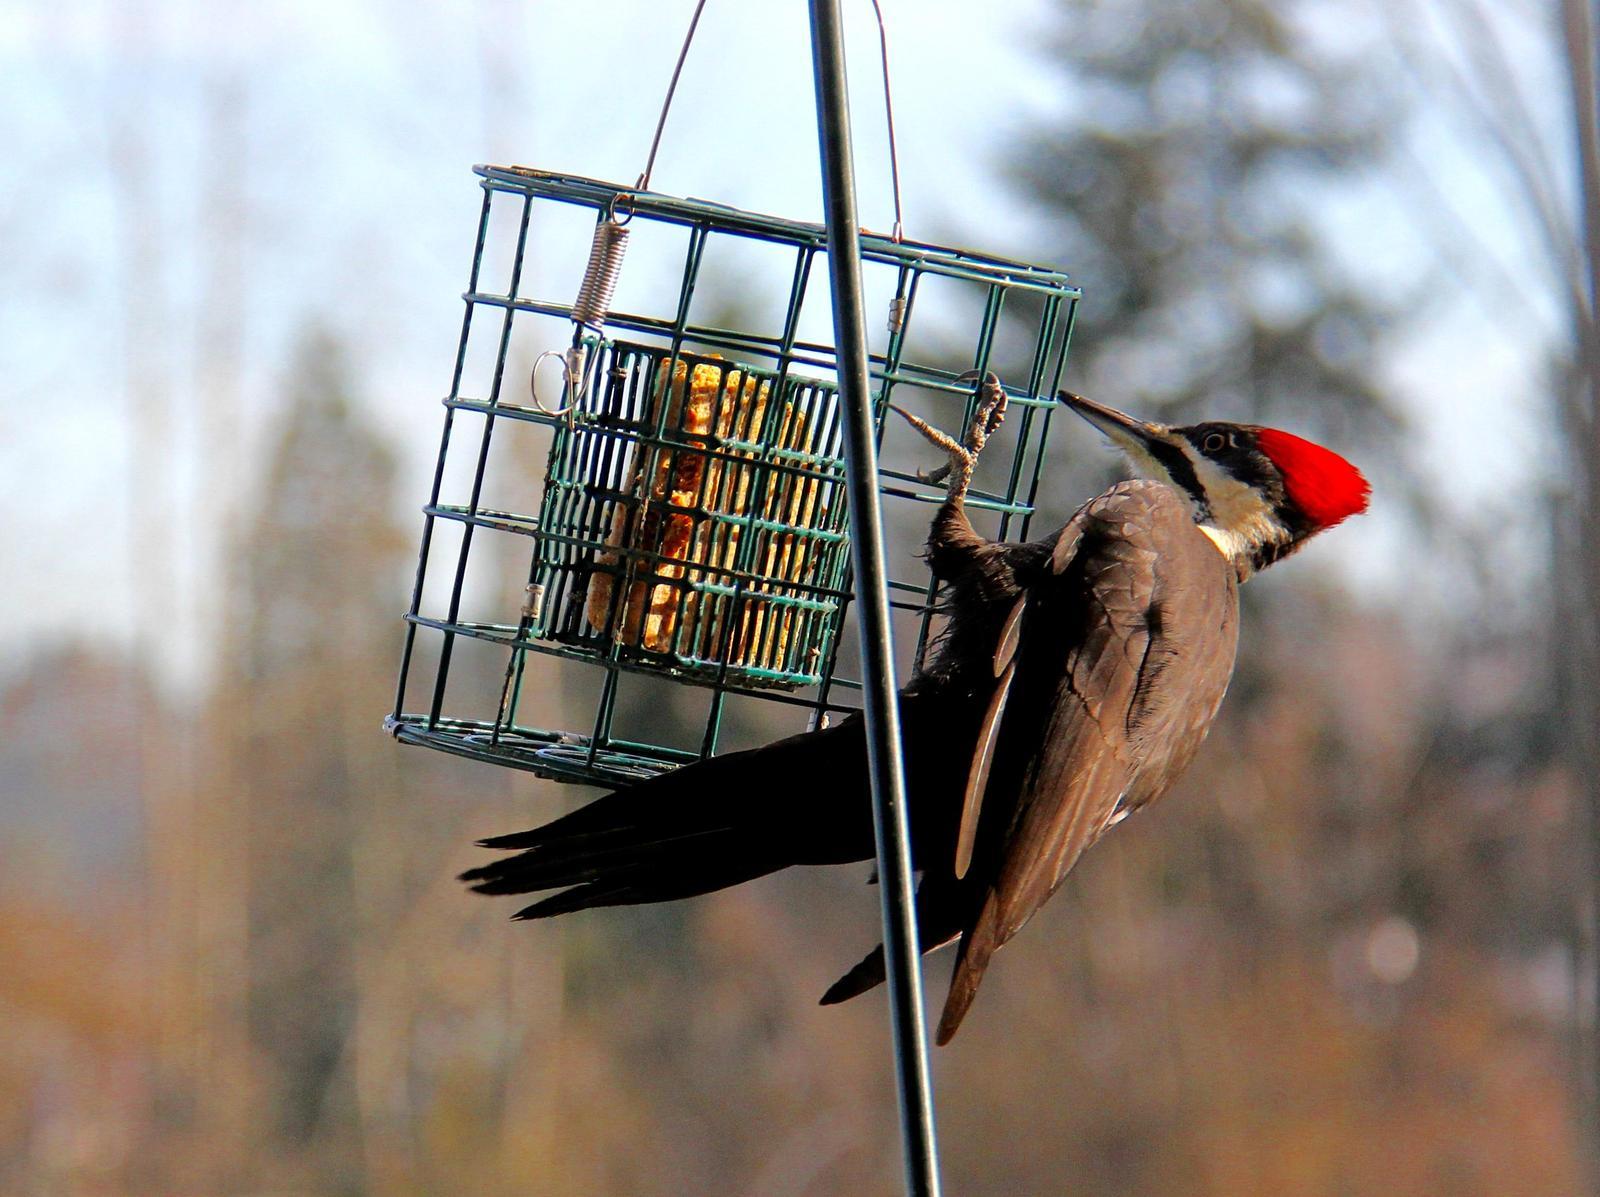 Pileated Woodpecker Photo by Kathryn Keith